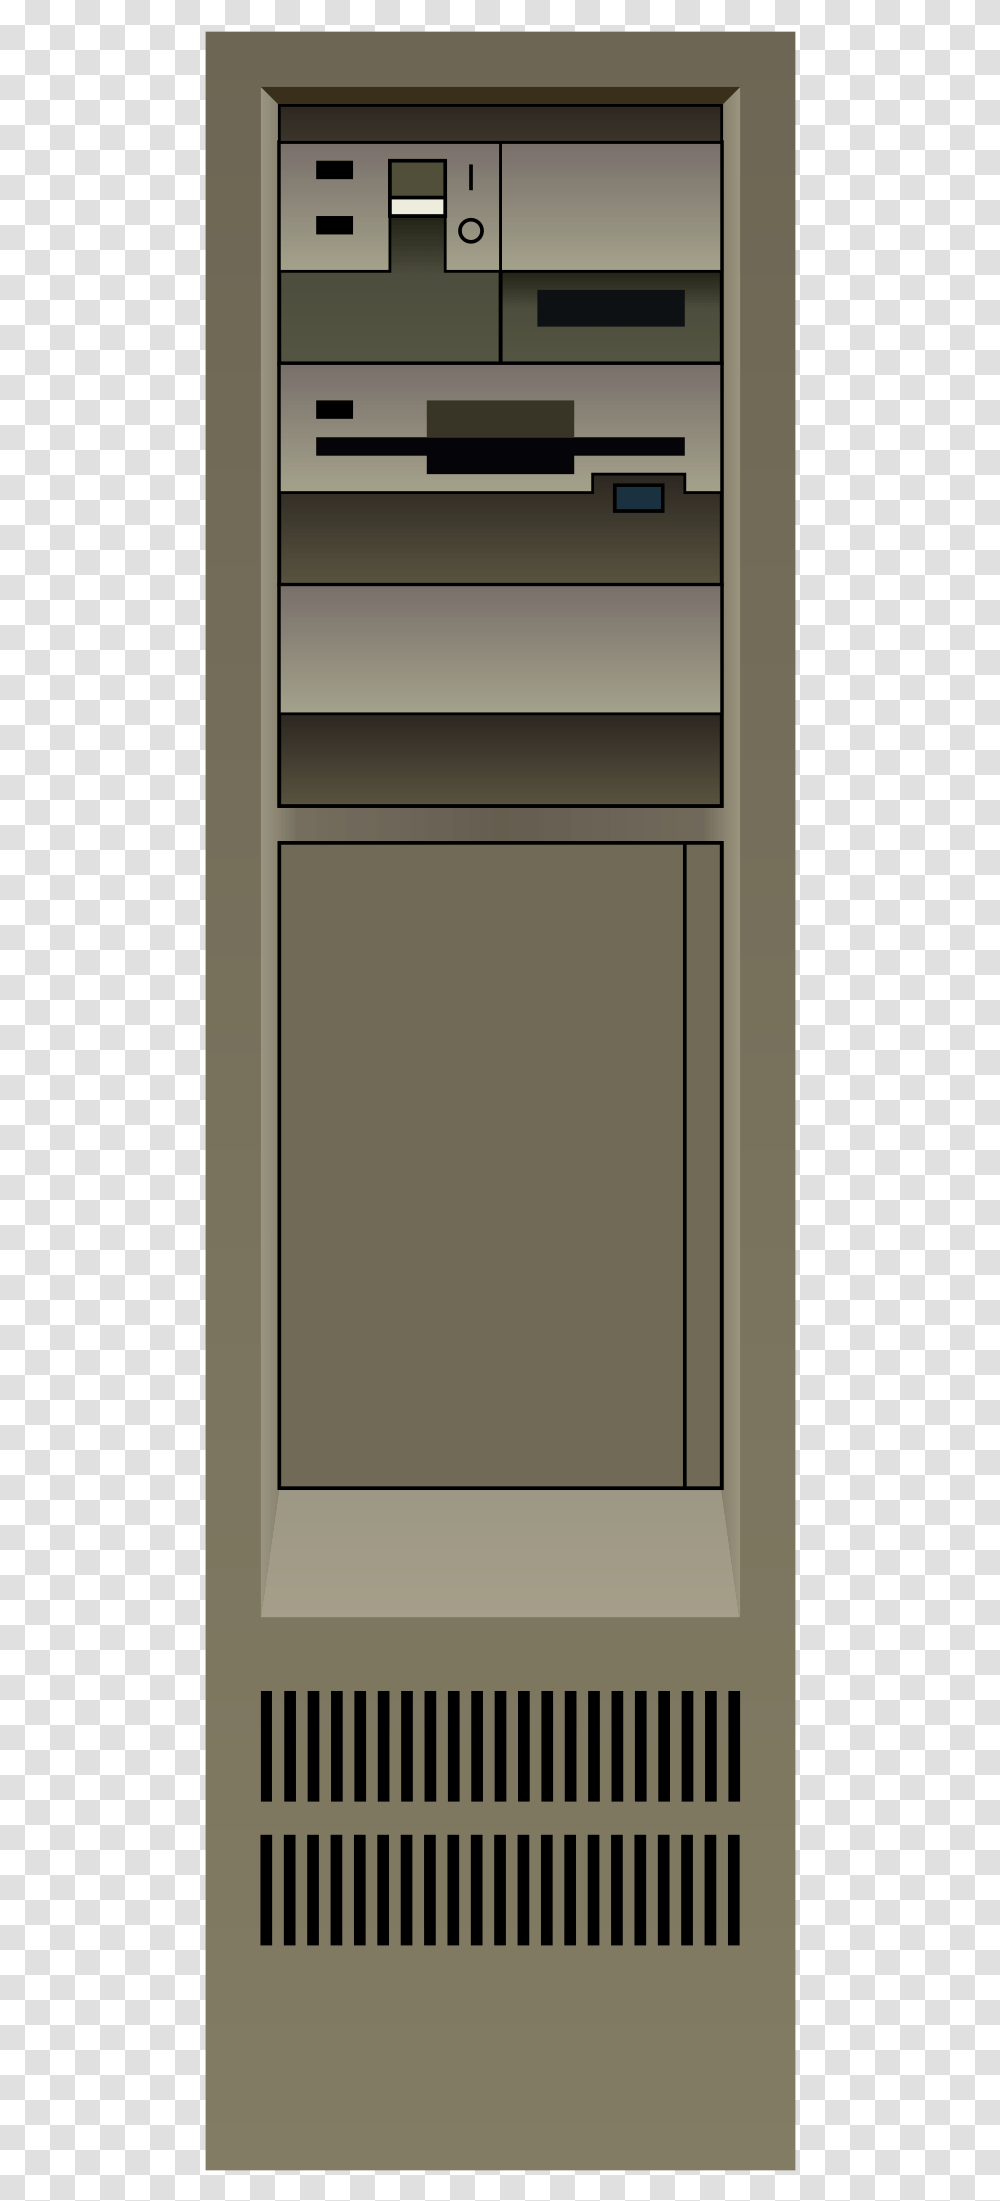 Early 90s Computer Clip Arts Home Door, Label, Furniture, Cabinet Transparent Png